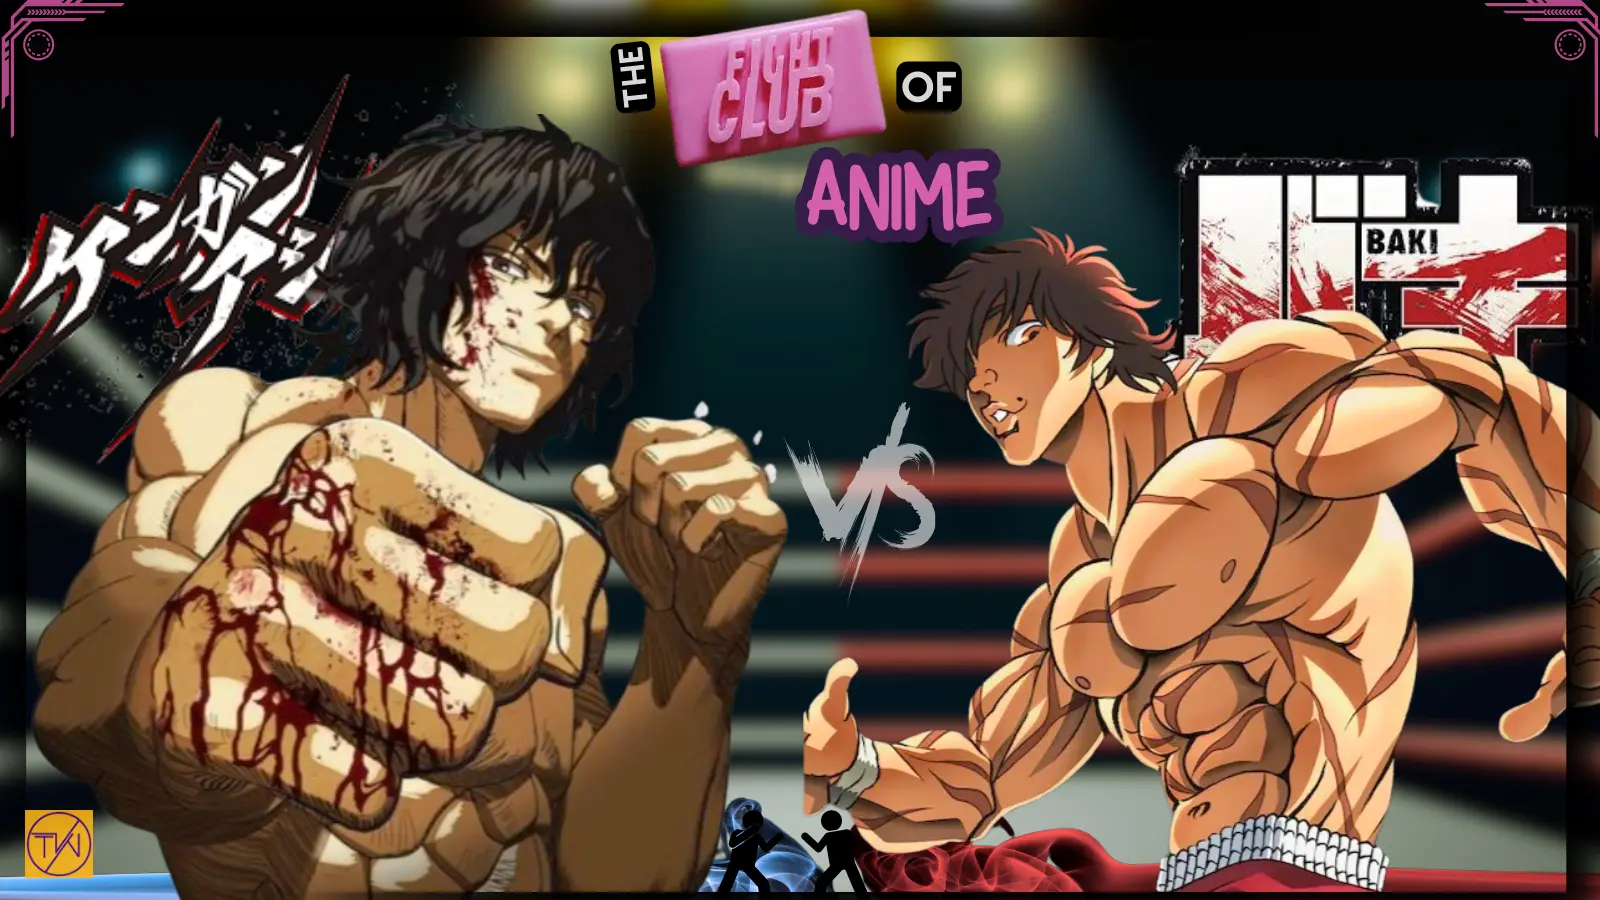 The Fight Club Of Anime